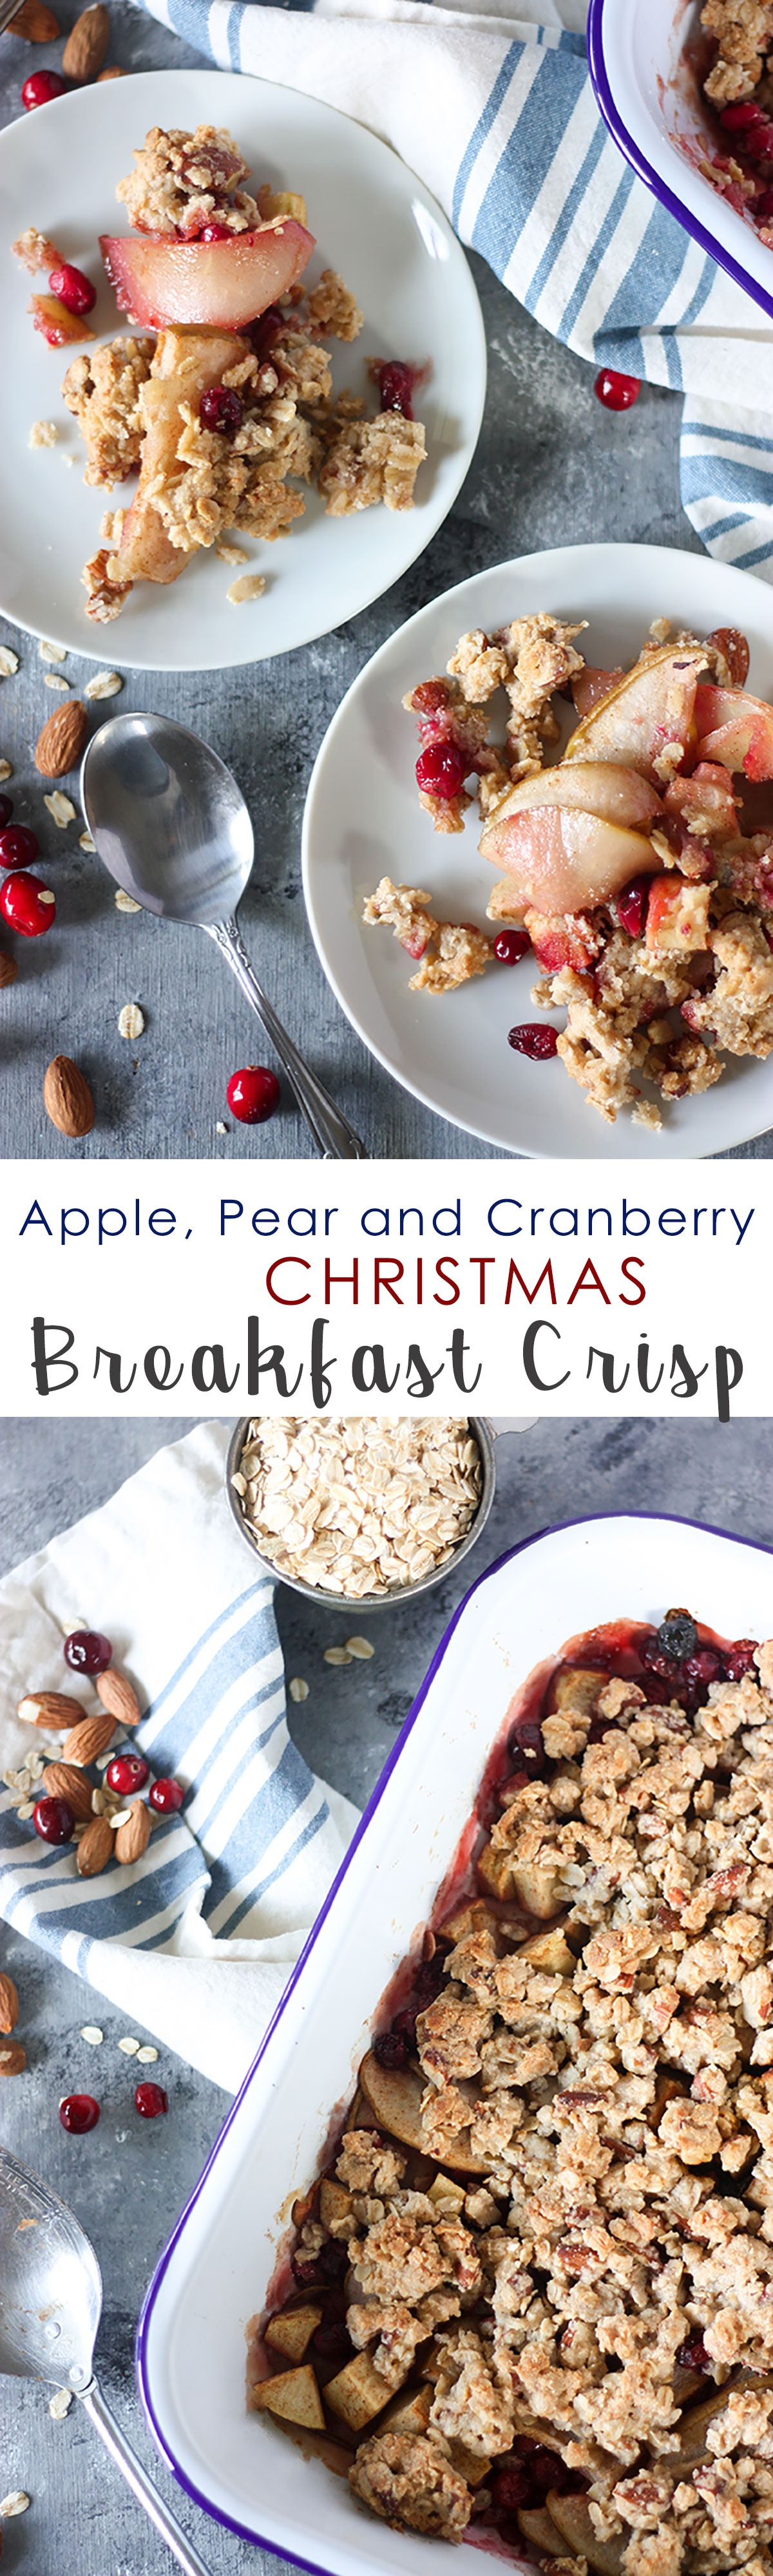 Apple, Pear and Cranberry Breakfast Crisp www.thehomecookskitchen.com